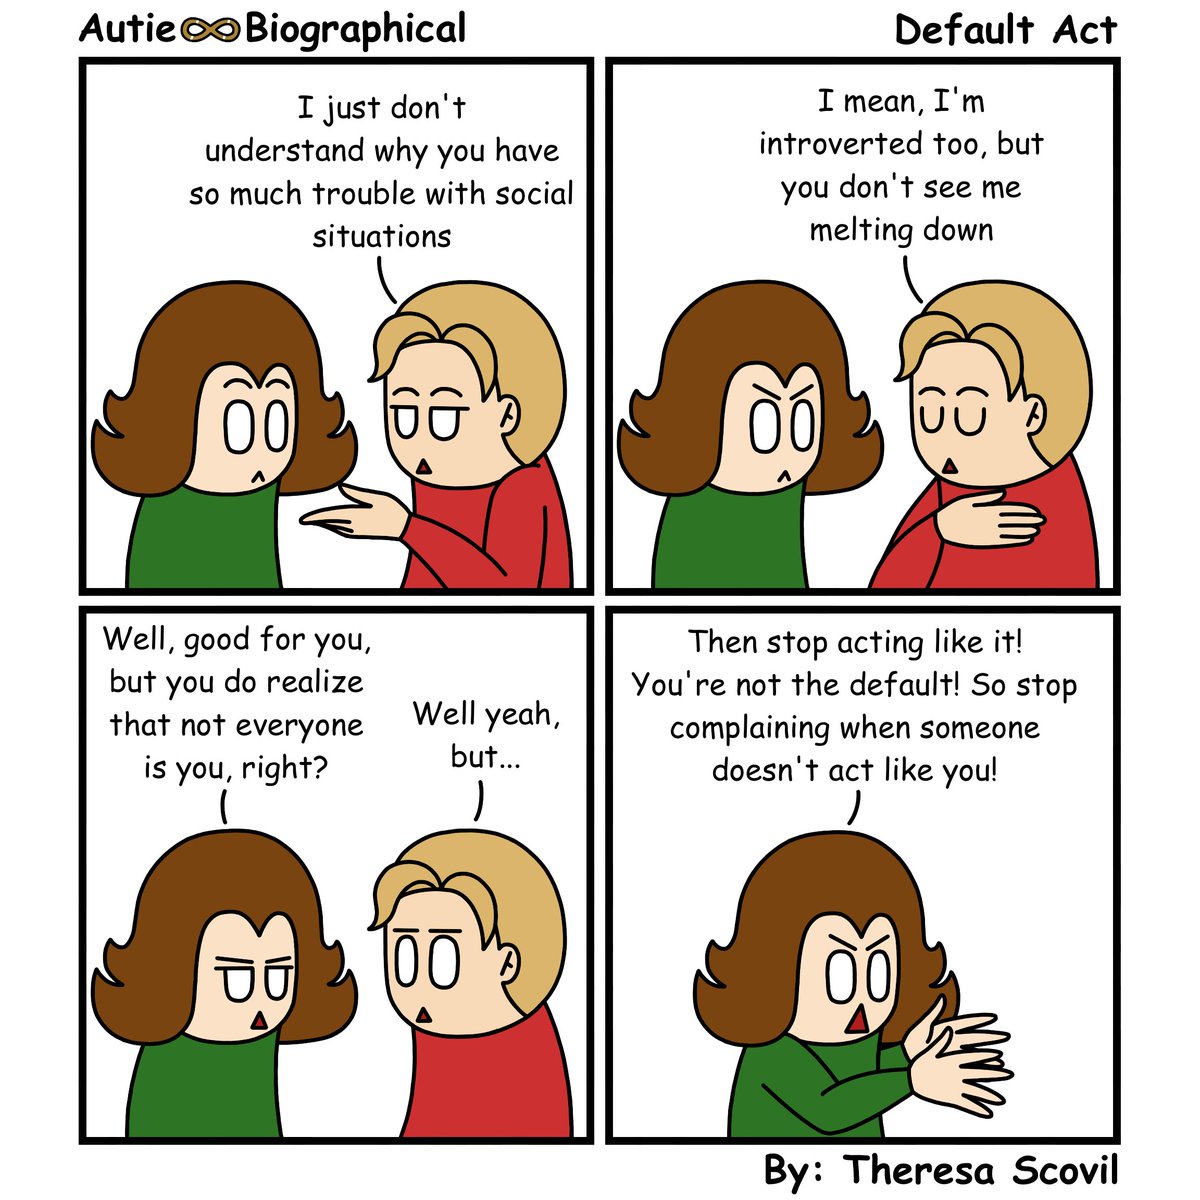 I've met people who seem genuinely confused as to why other people don't act exactly like them. It's like they can't grasp the fact that they aren't the default. #AutieBiographical #ActuallyAutistic